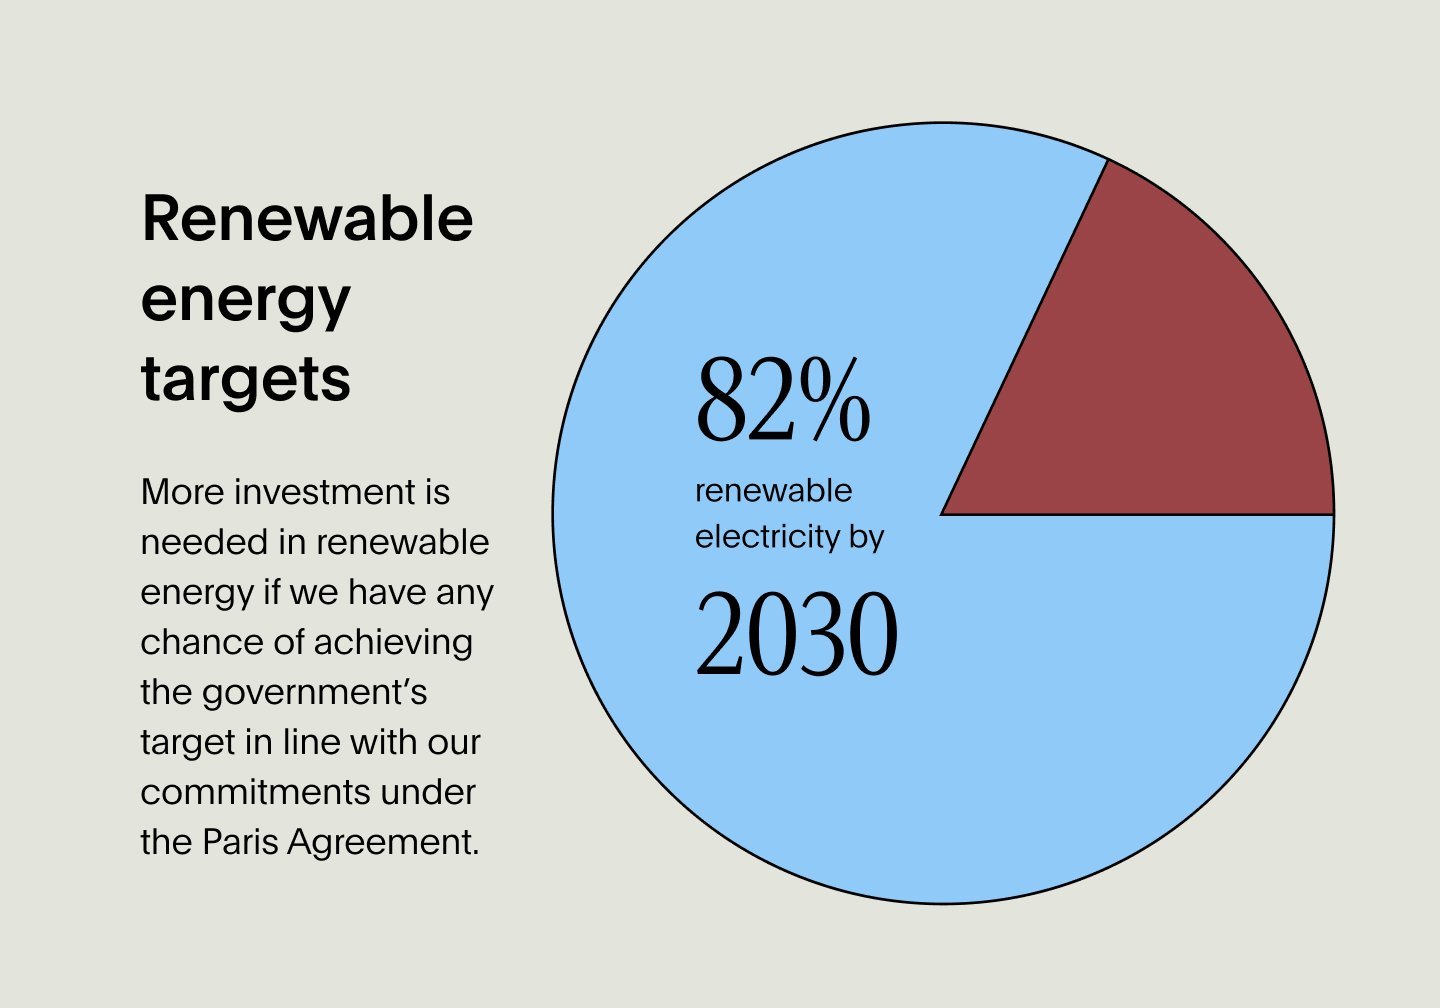 Pie graph showing renewable energy targets with goal of 82% renewable energy generation by 2030